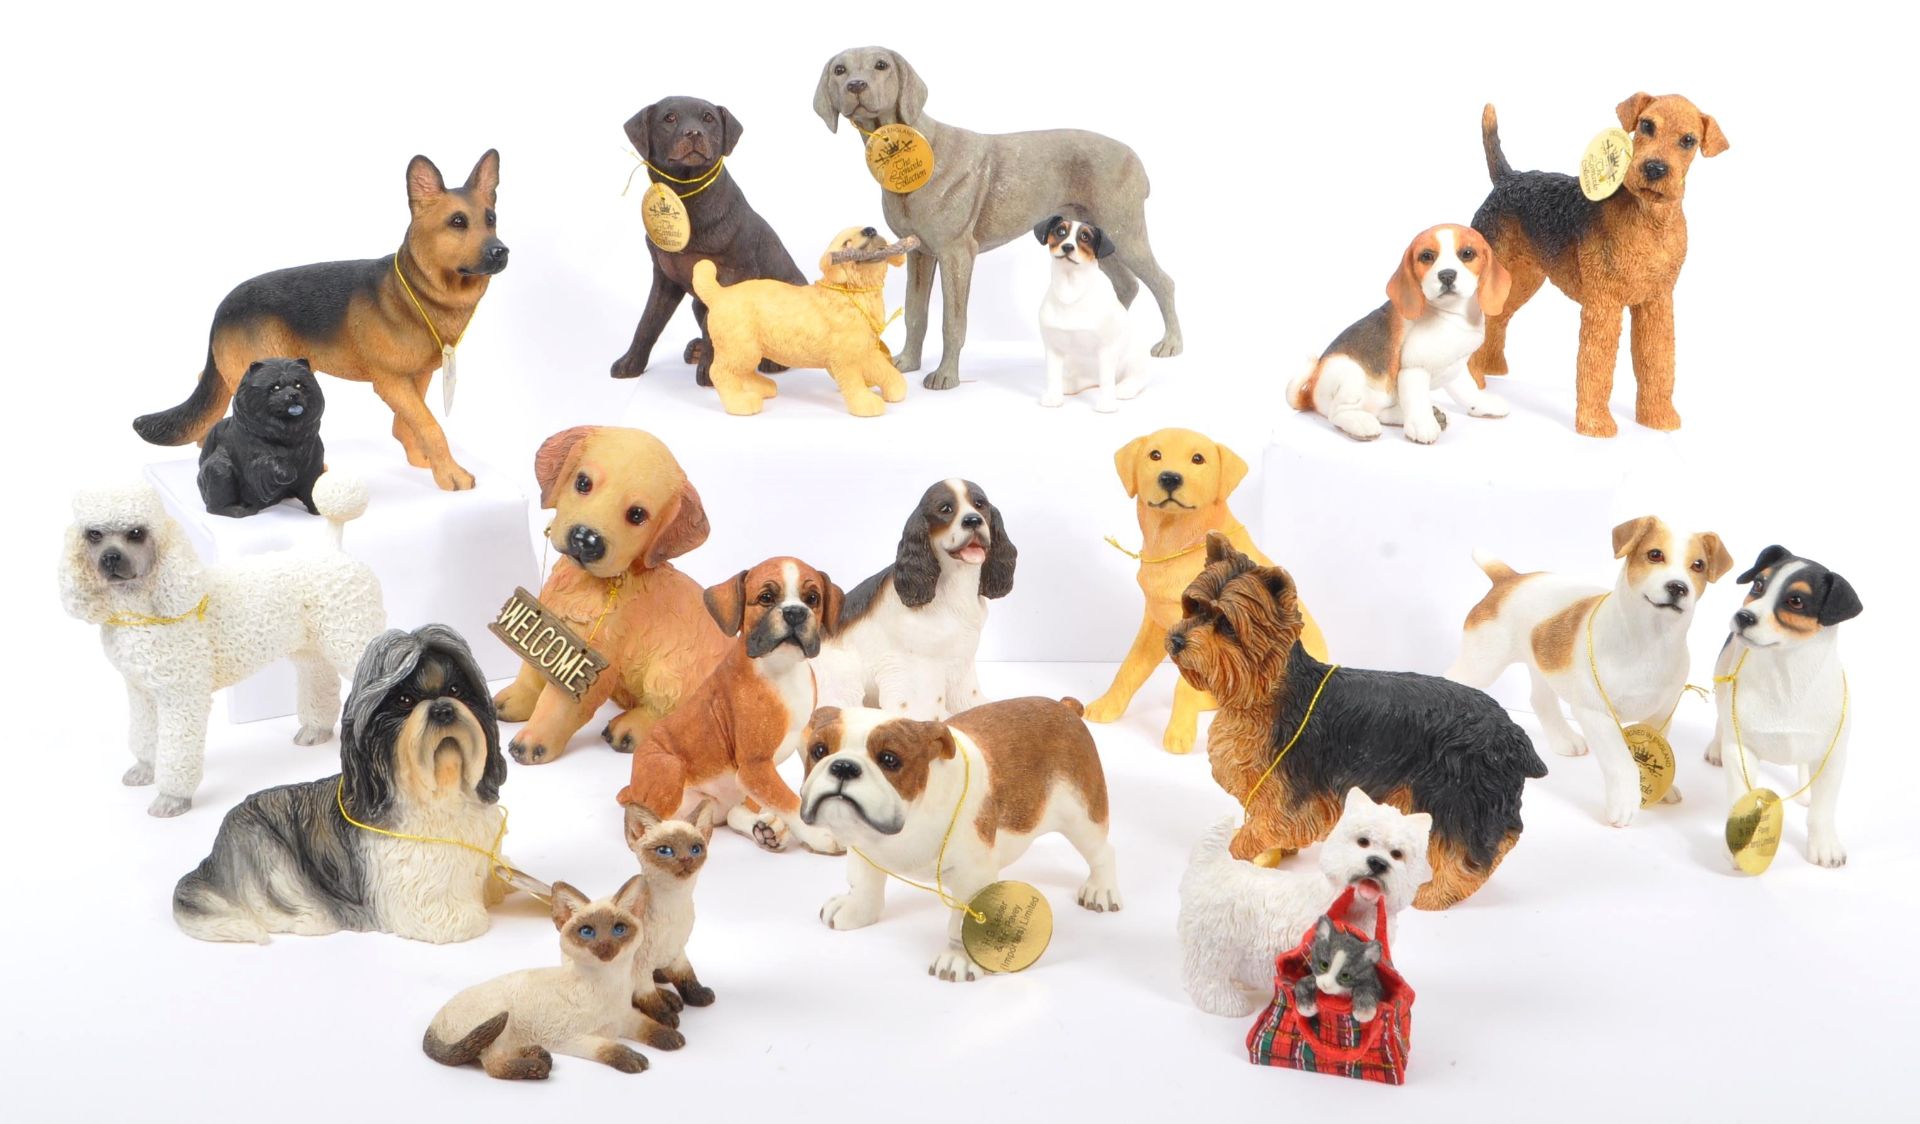 COLLECTION OF DOG STUDY FIGURINES BY THE LEONARDO COLLECTION